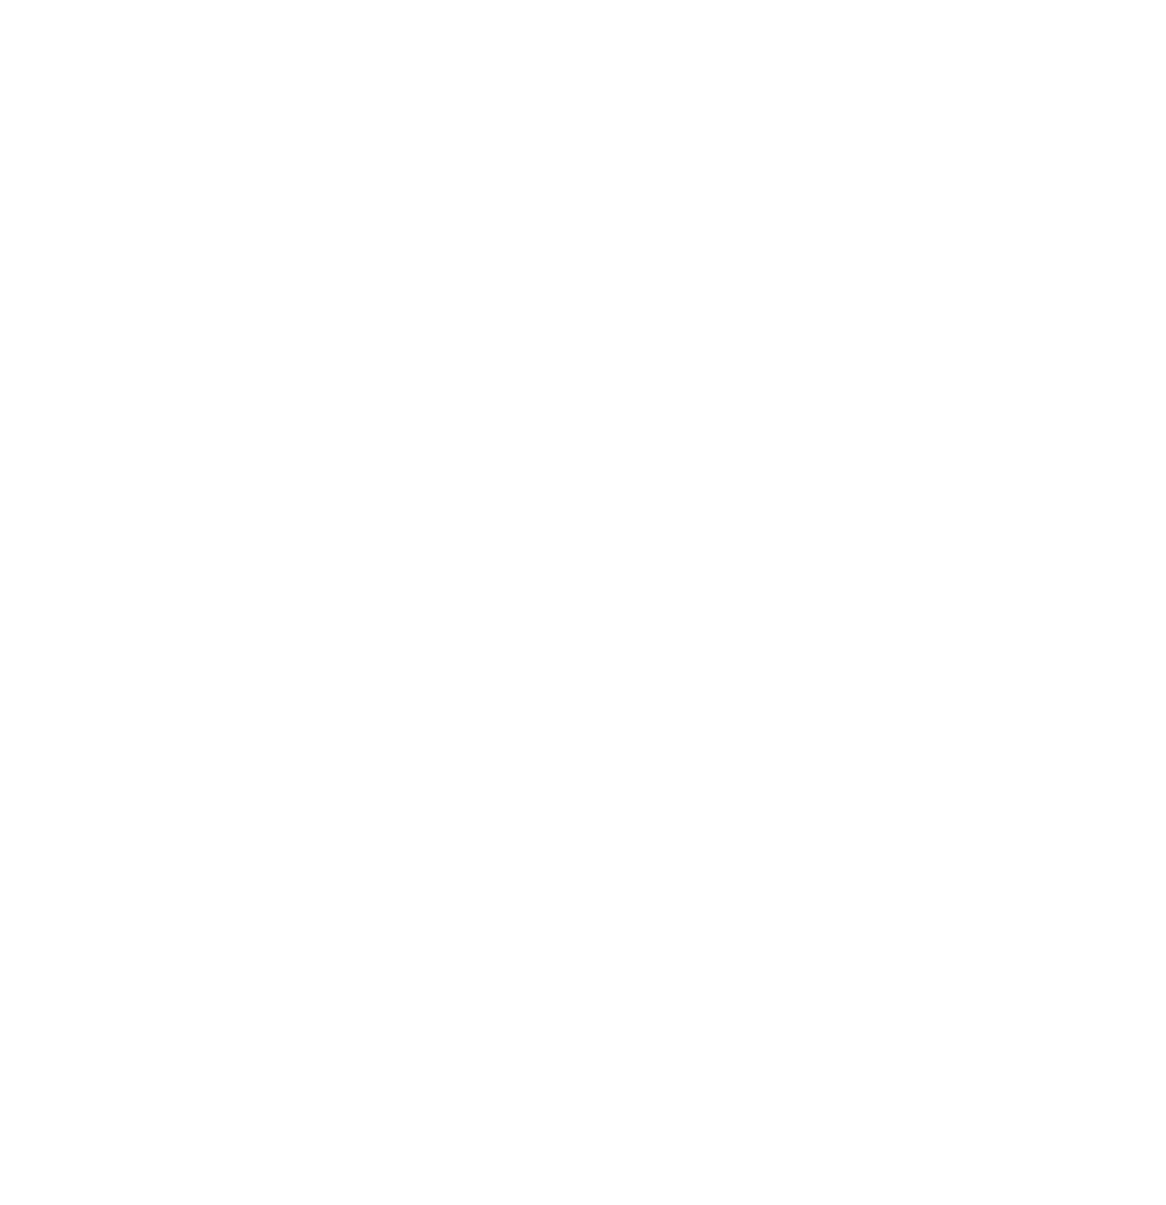 The Marvellous Hearts 